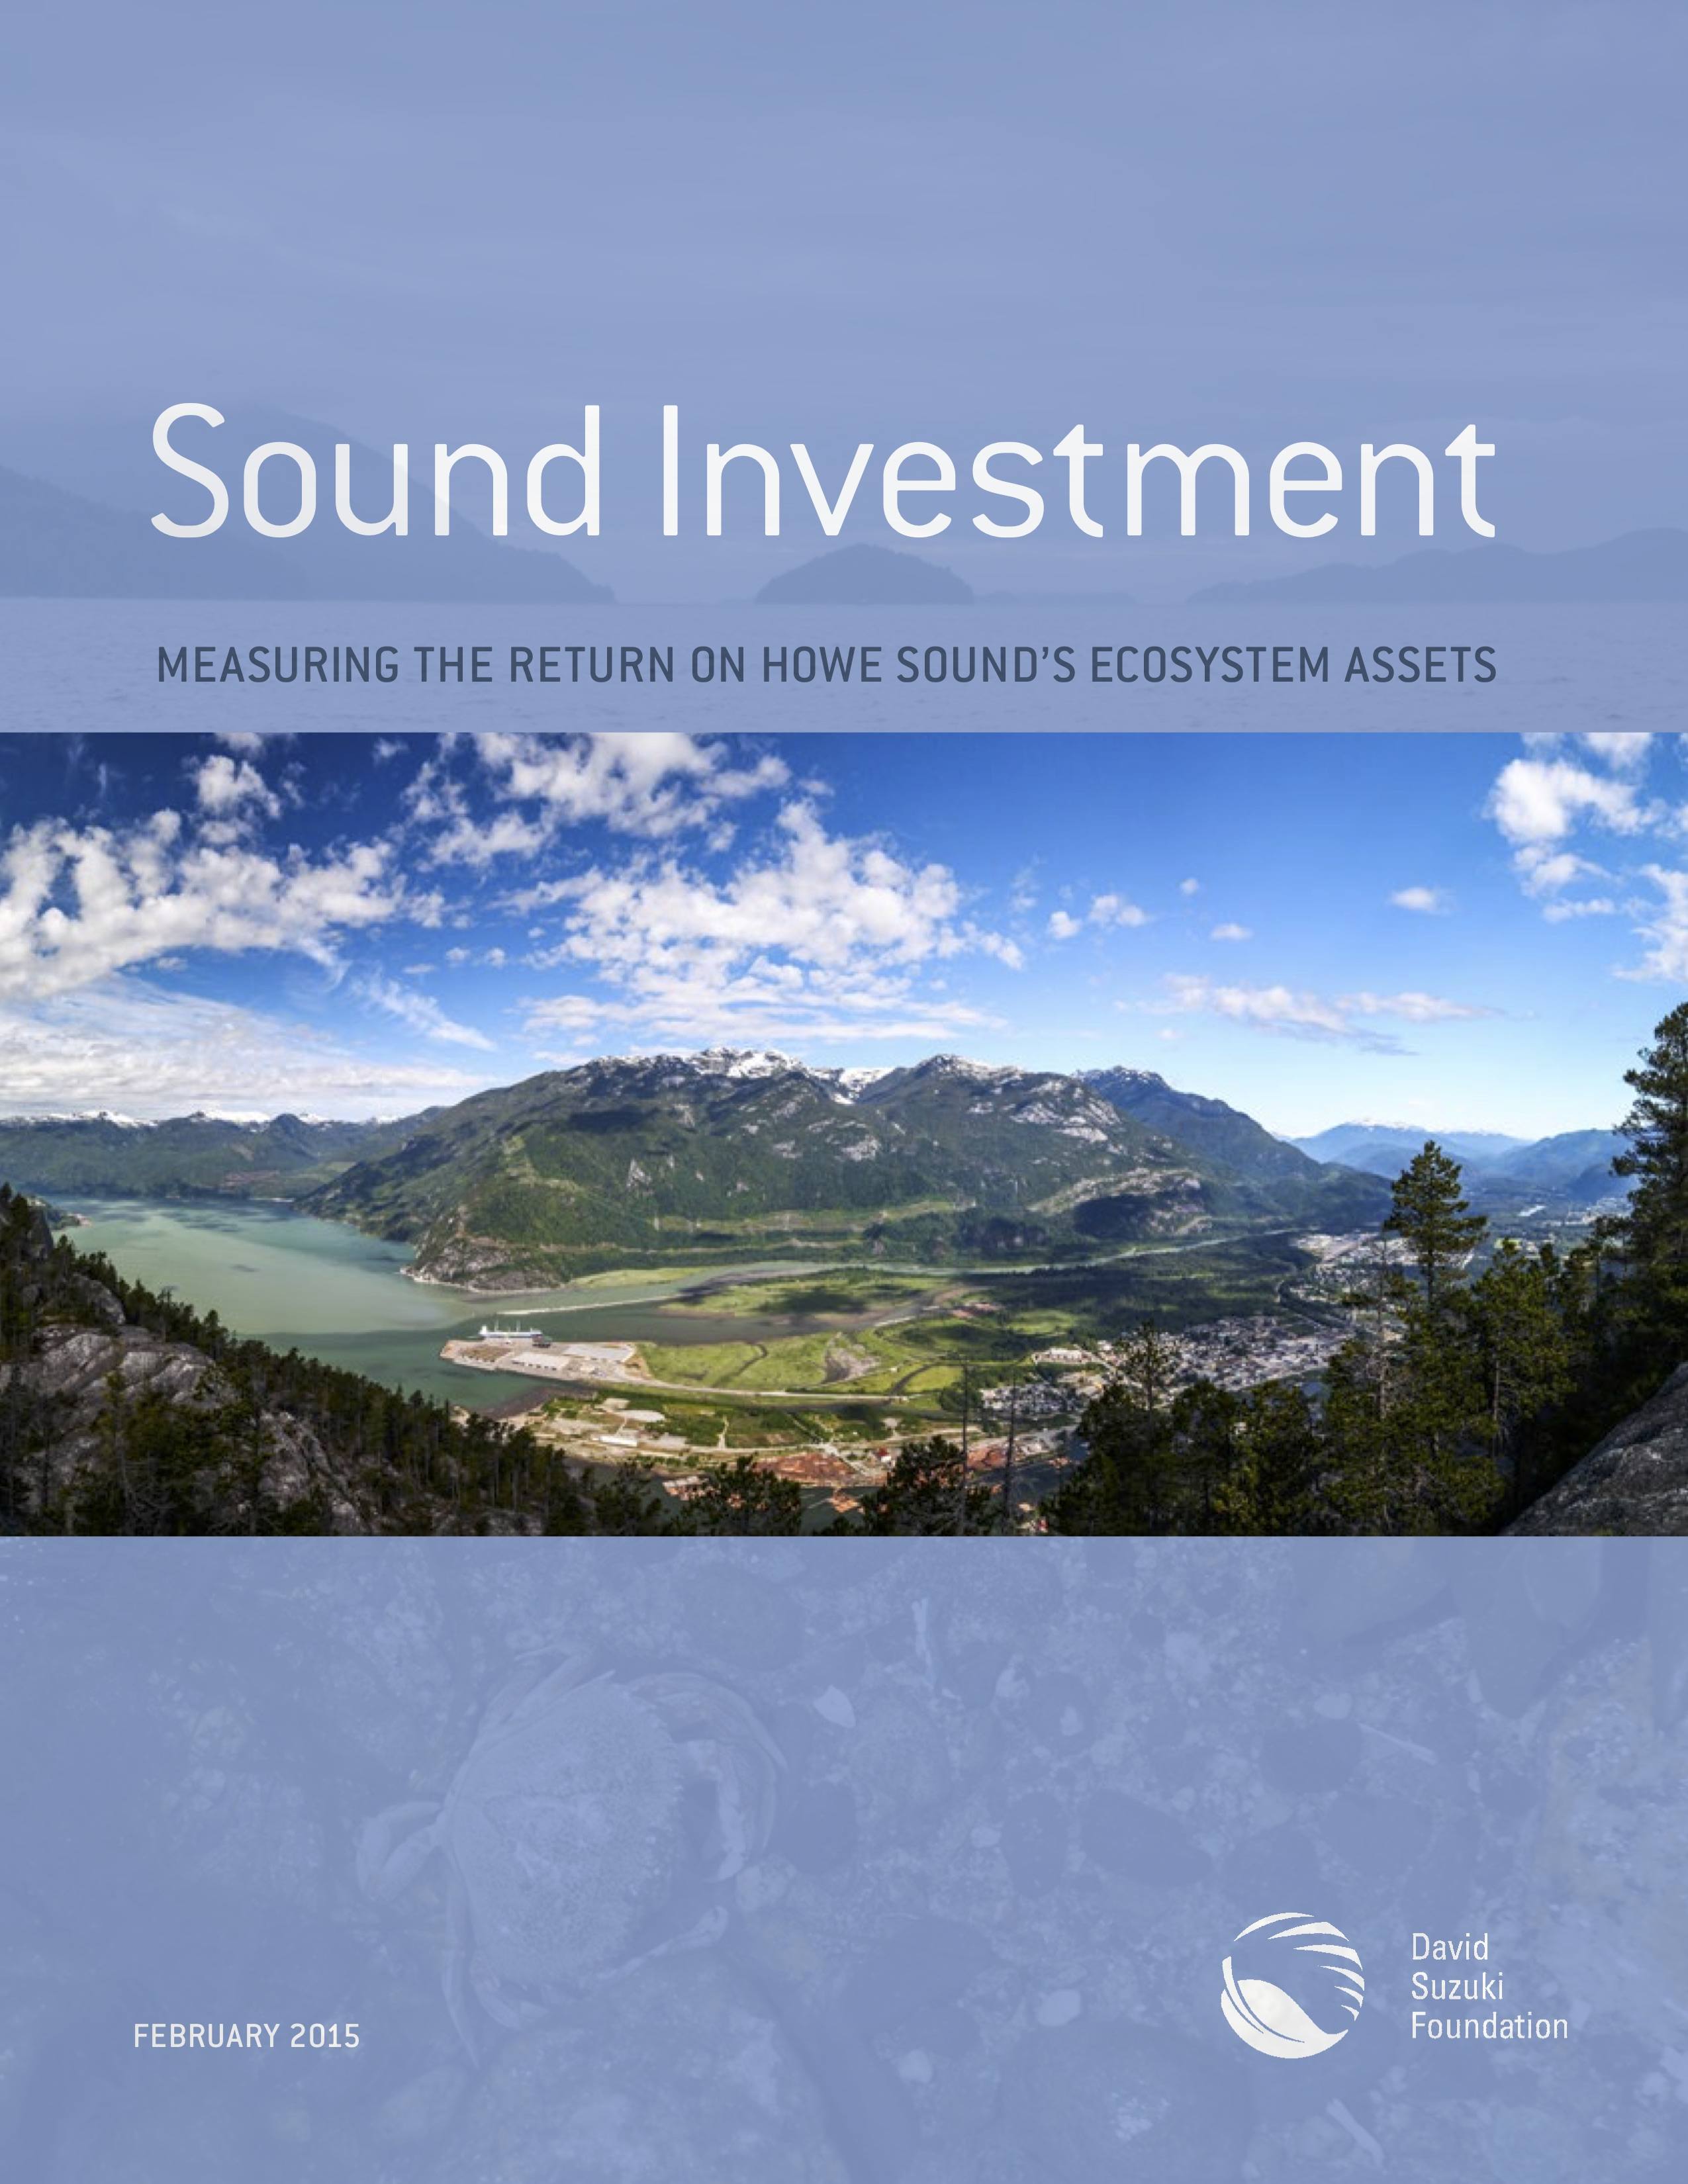 Sound Investment: Measuring the Return on Howe Sound’s Ecosystem Assets